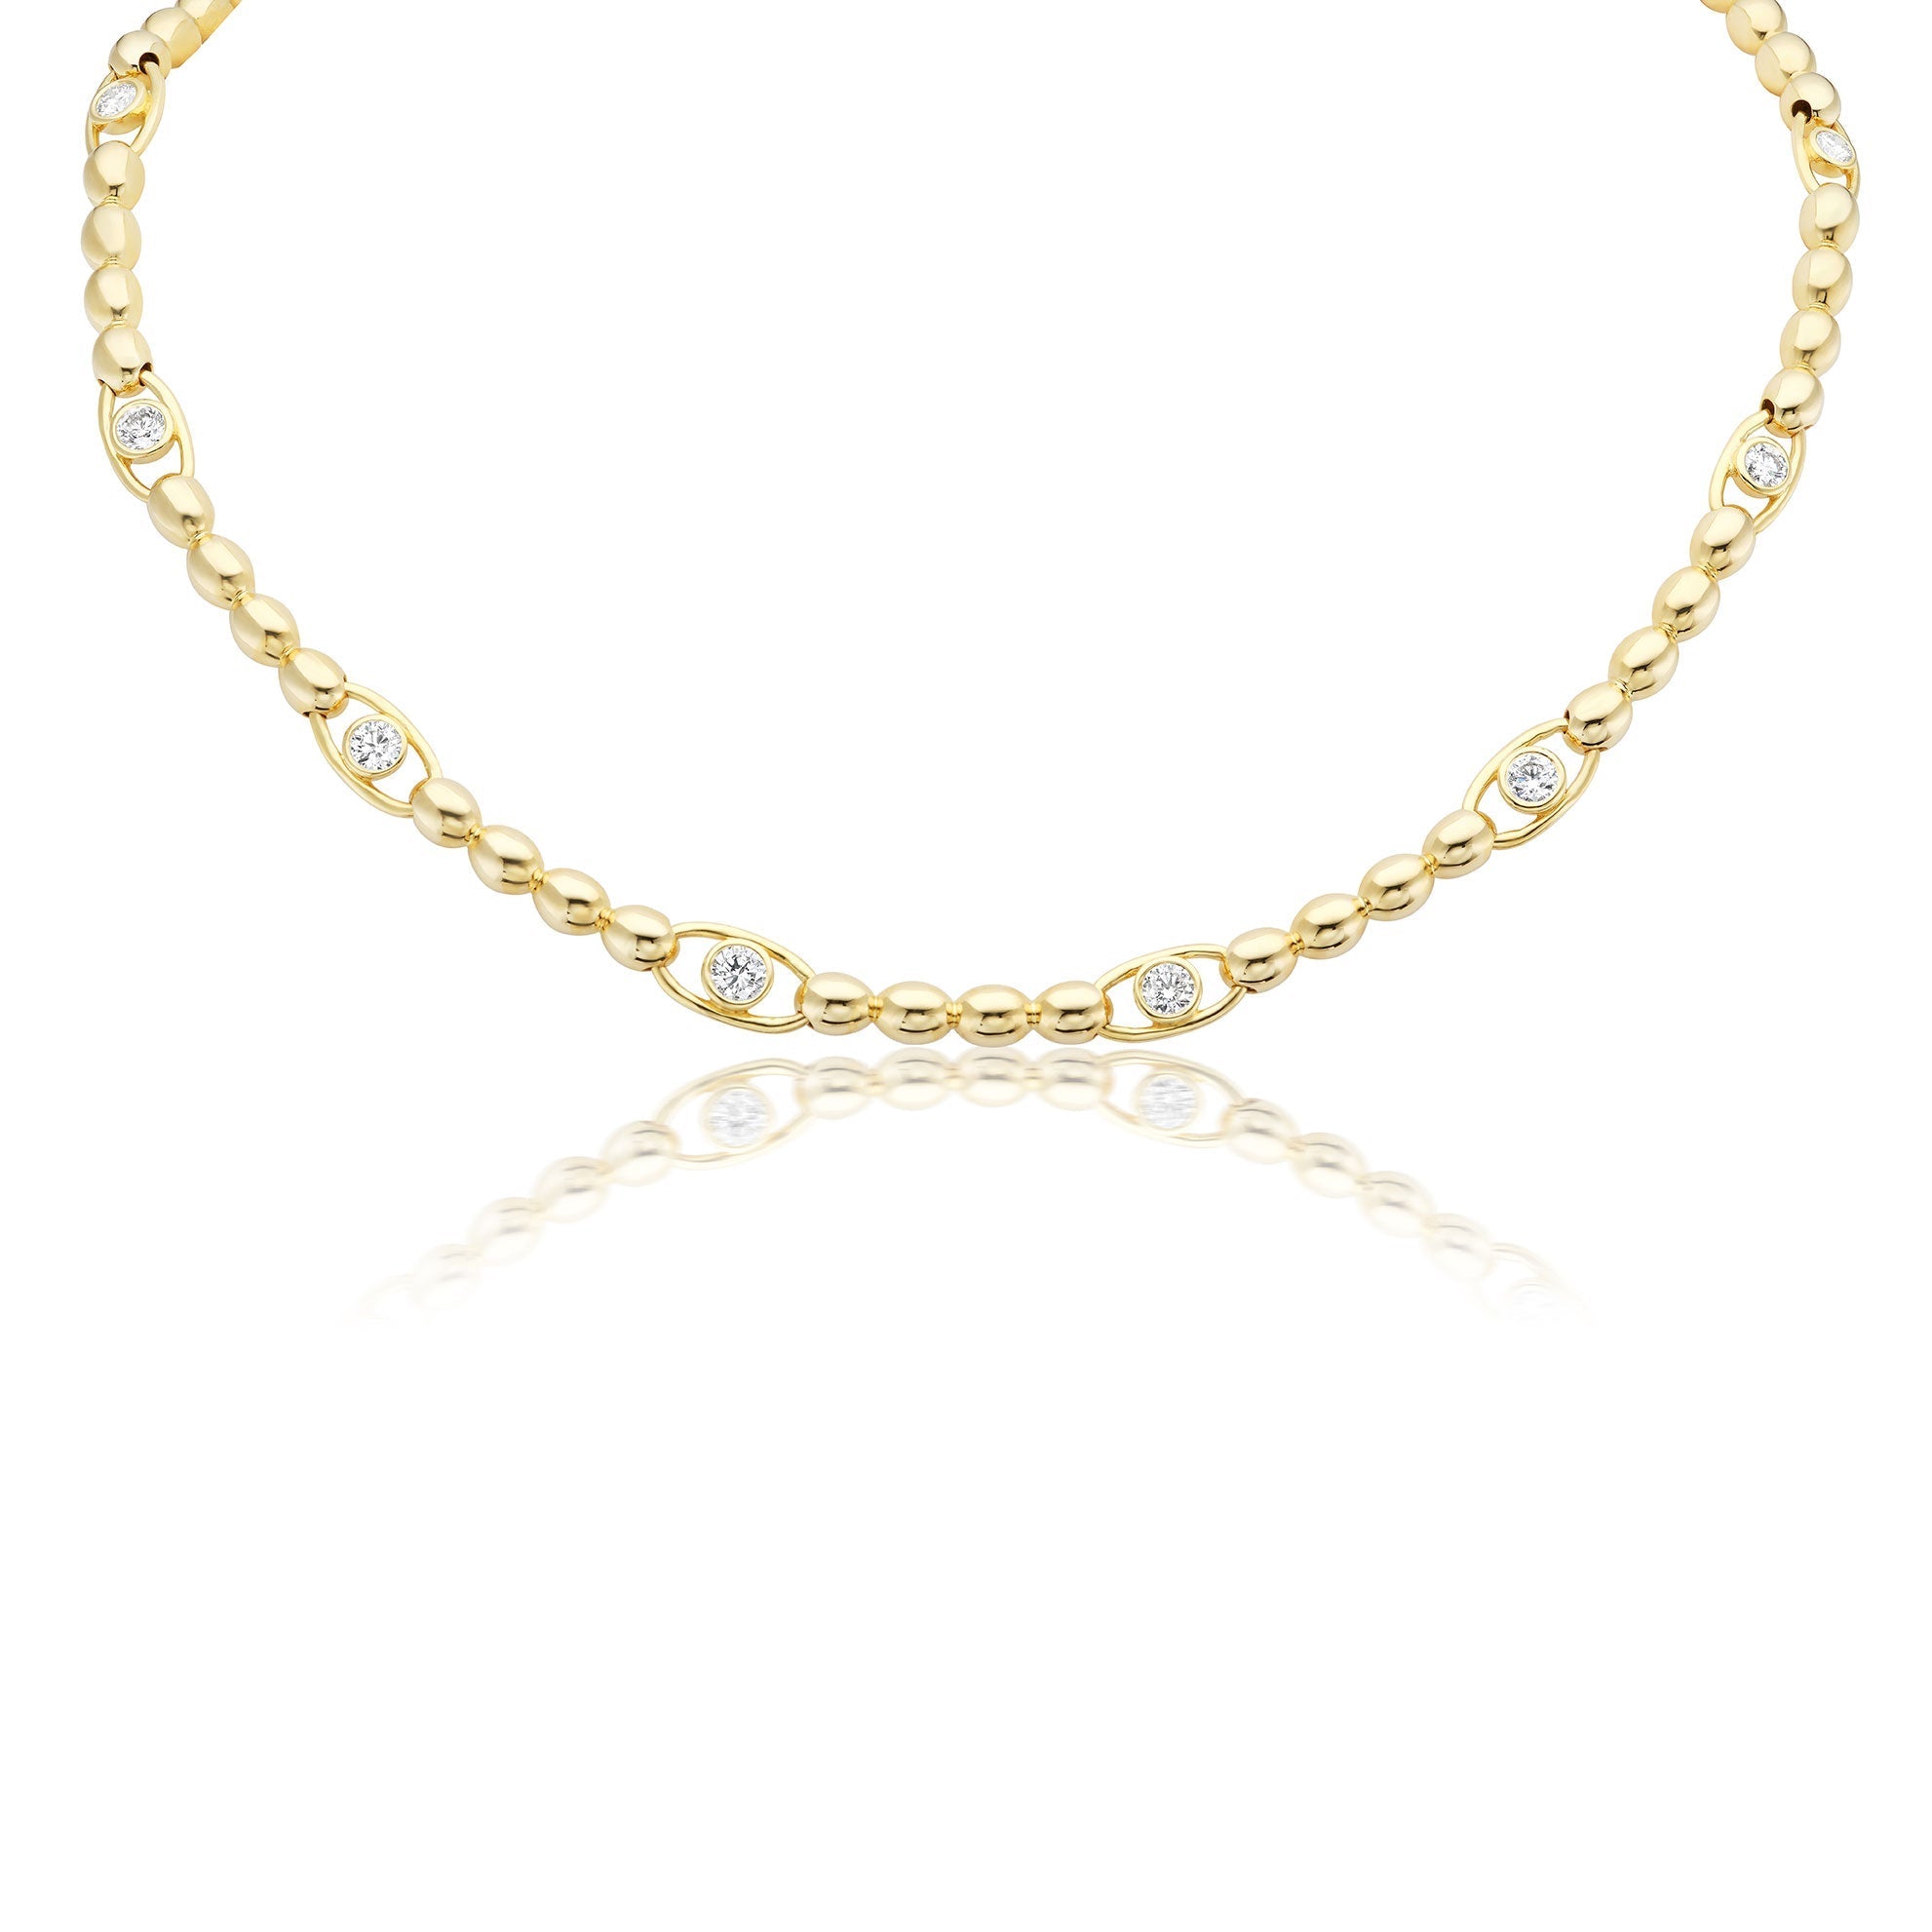 SIGNATURE LINK NECKLACE WITH DIAMONDS IN 18K - ANNE BAKERSIGNATURE LINK NECKLACE WITH DIAMONDS IN 18KANNE BAKER